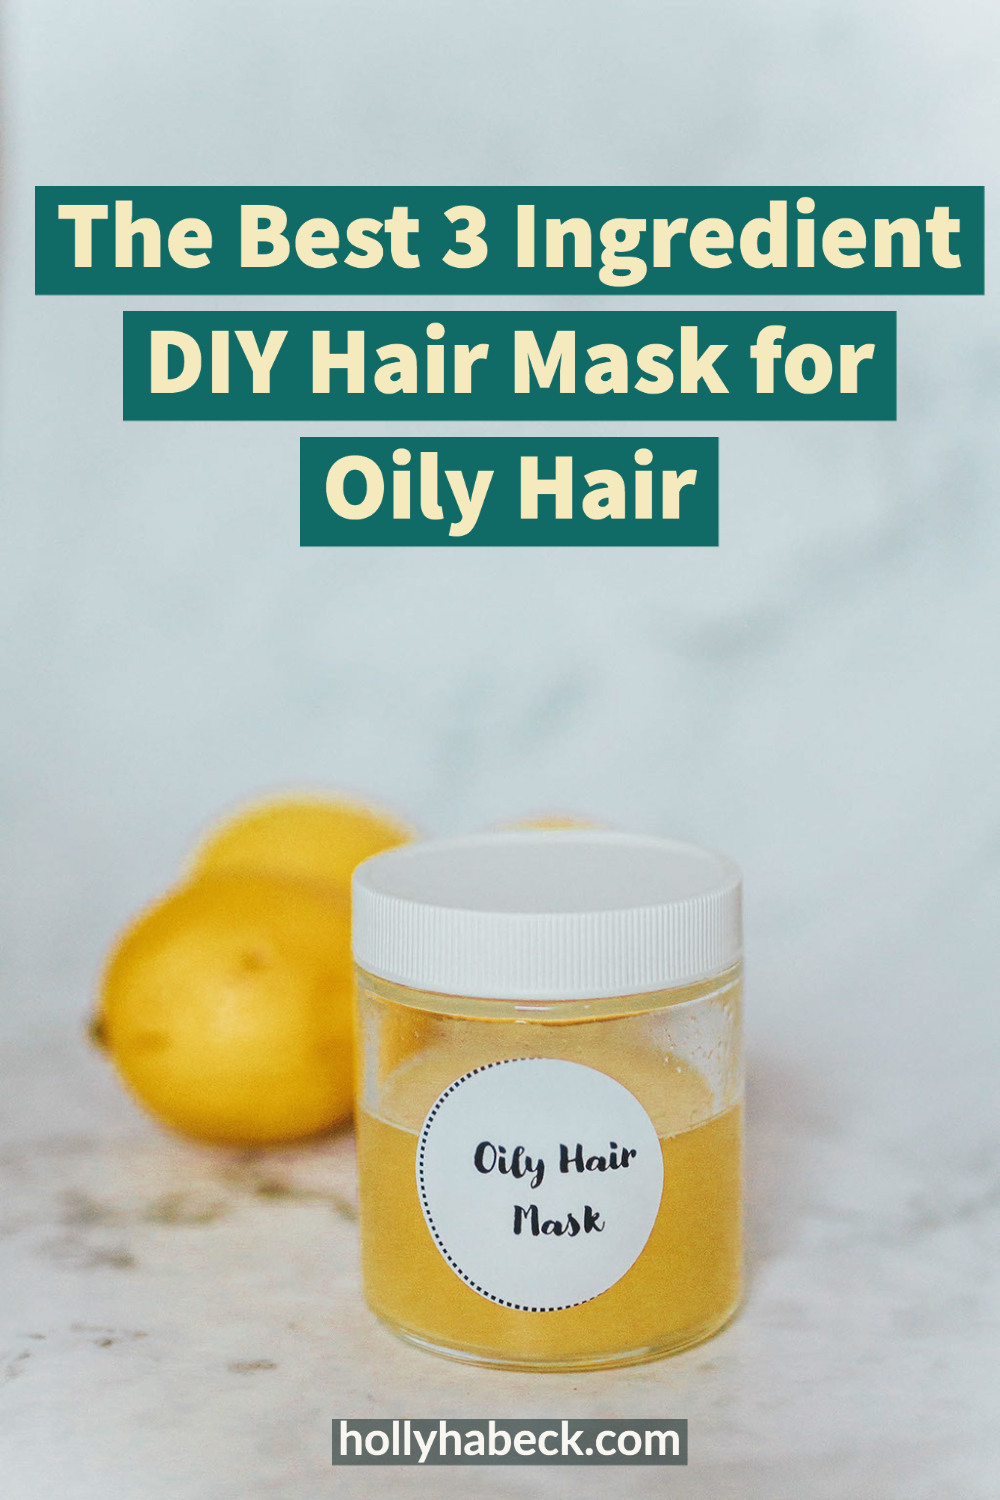 The Best Hair Mask for Oily Hair (EASY, 3 Ingredients) - Holly Habeck